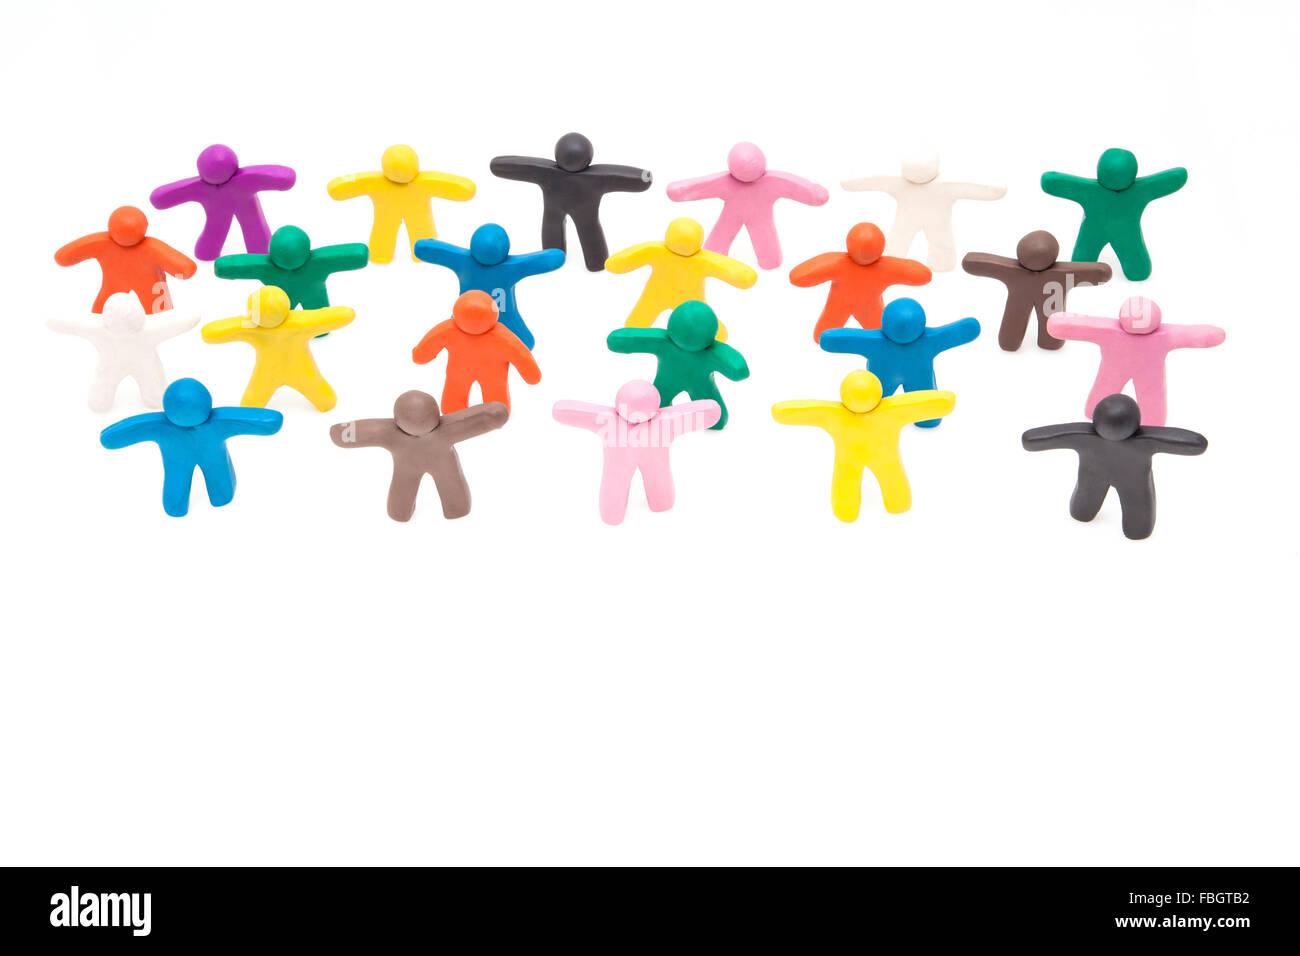 Crowd group of colourful plasticine Stock Photo